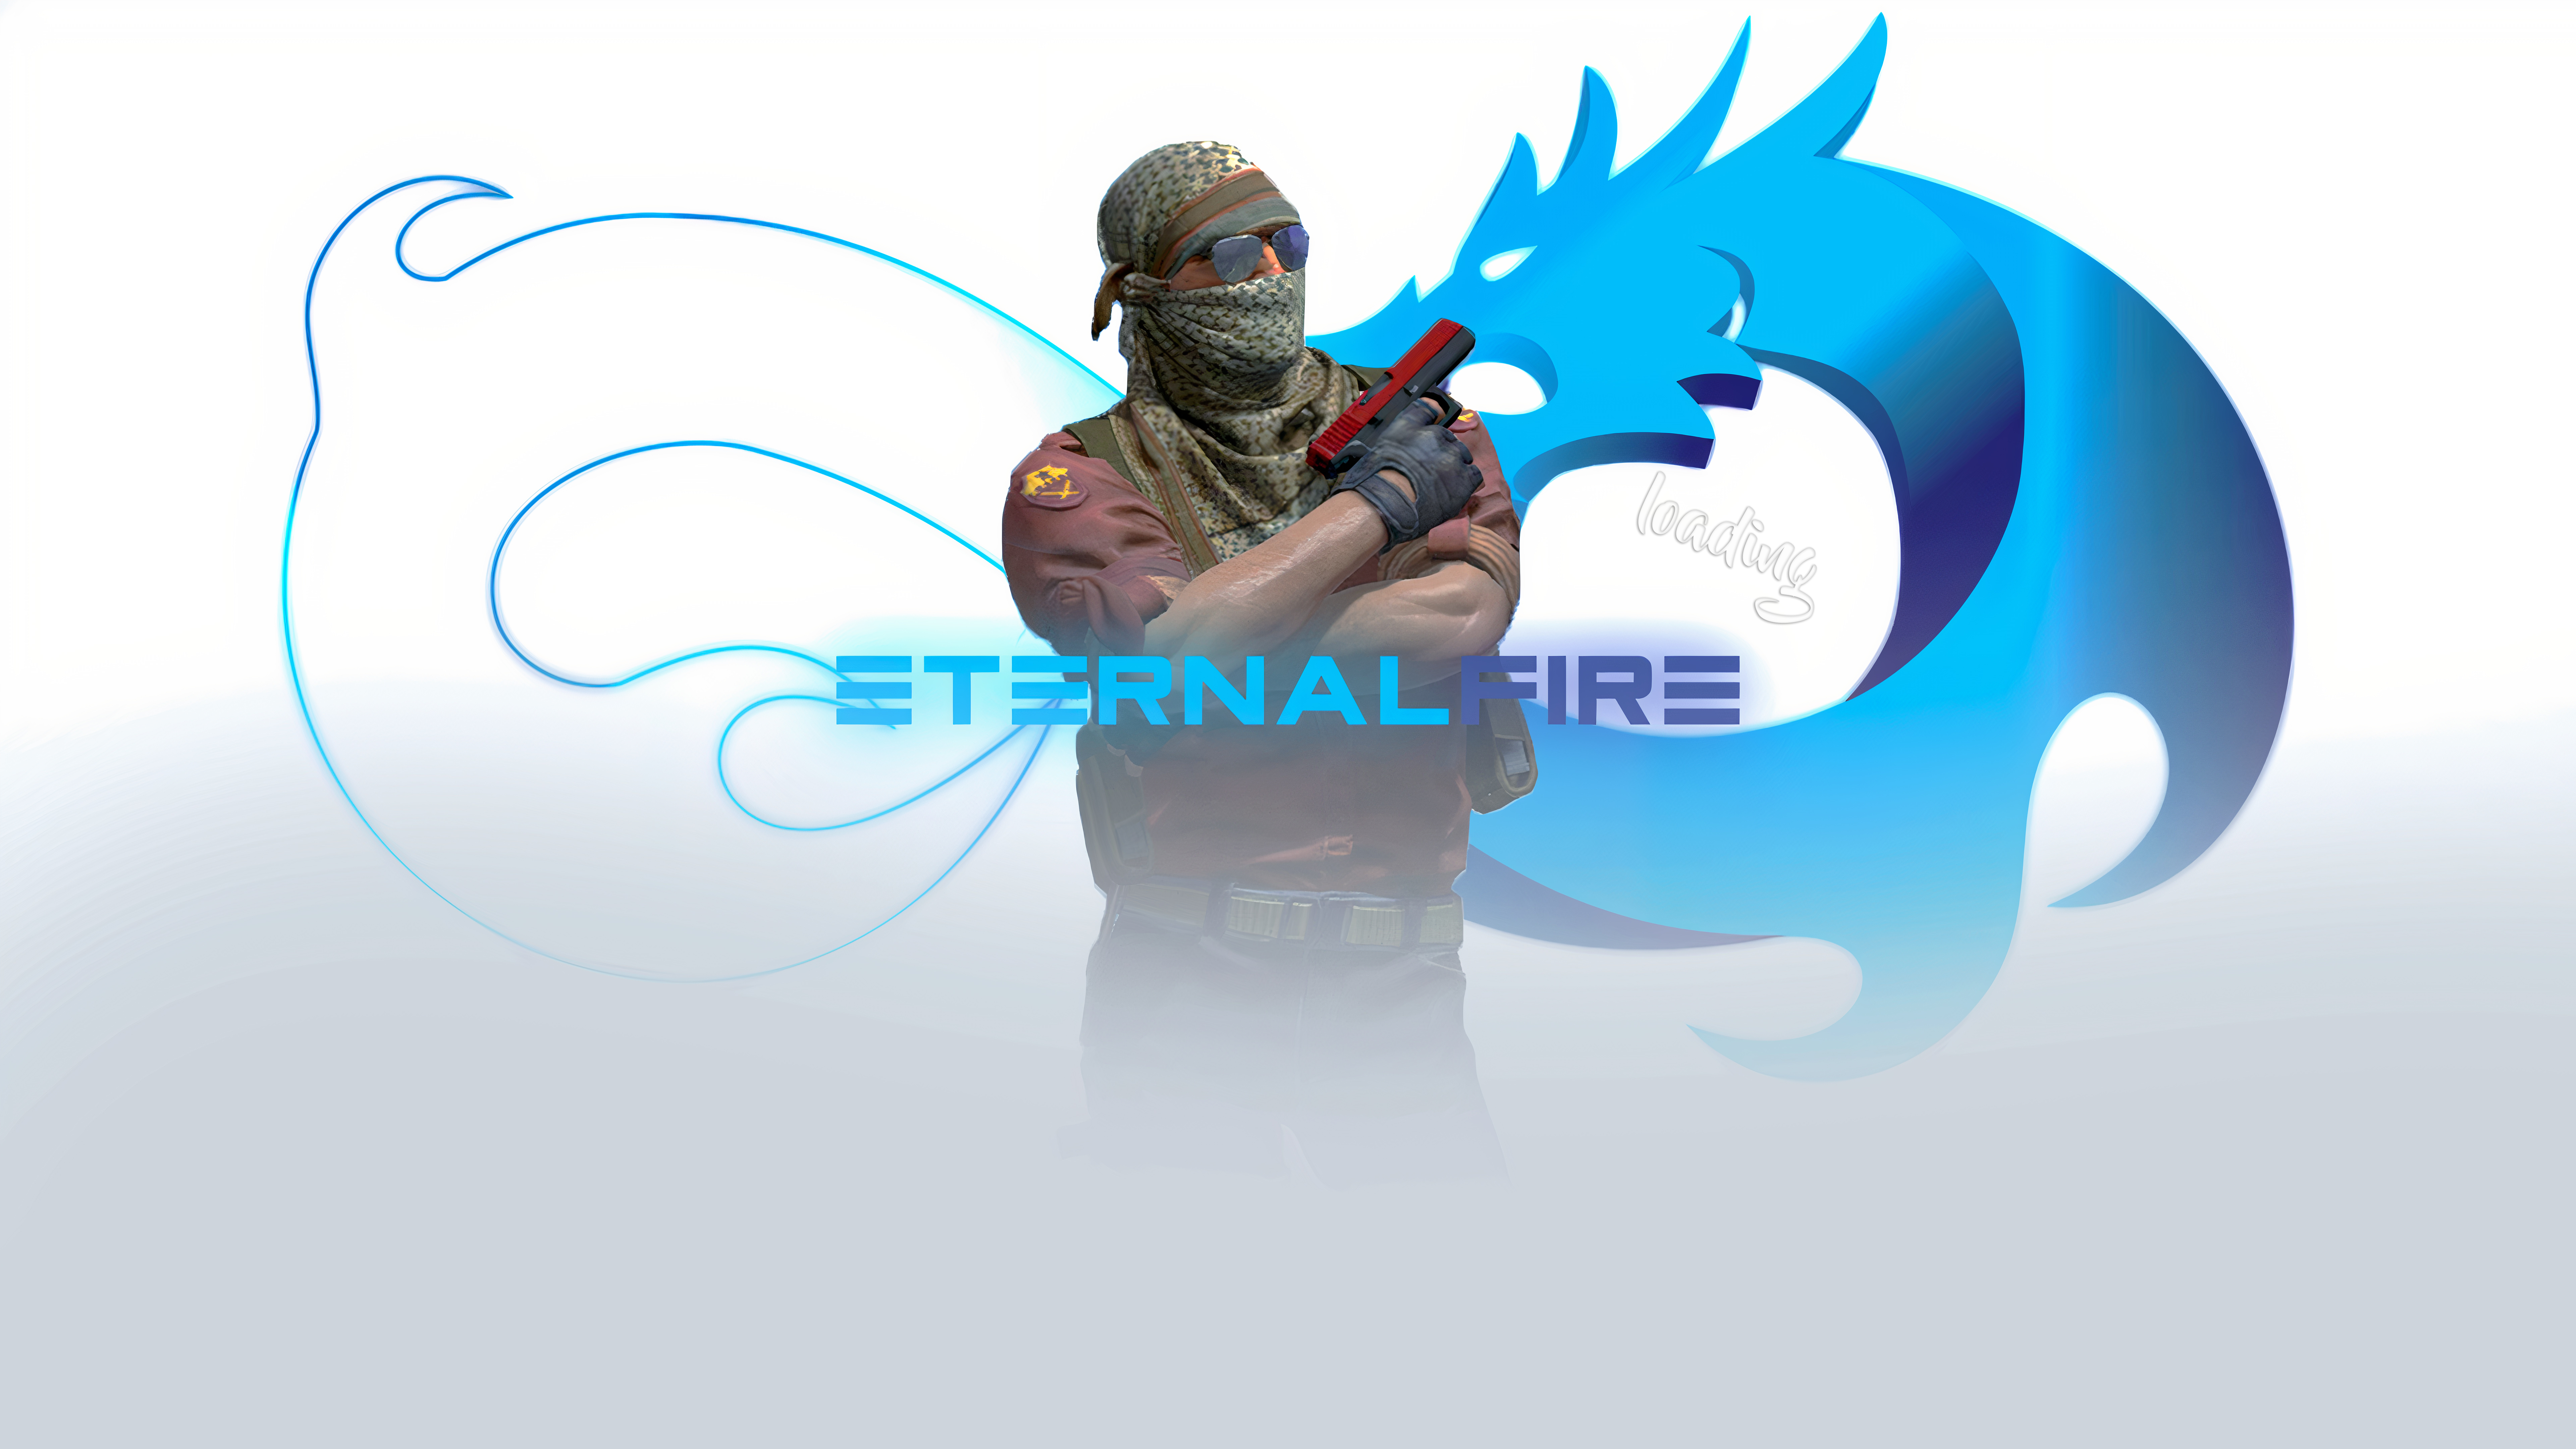 General 7680x4320 Counter-Strike Counter-Strike: Global Offensive Turkey E-Sports PC gaming